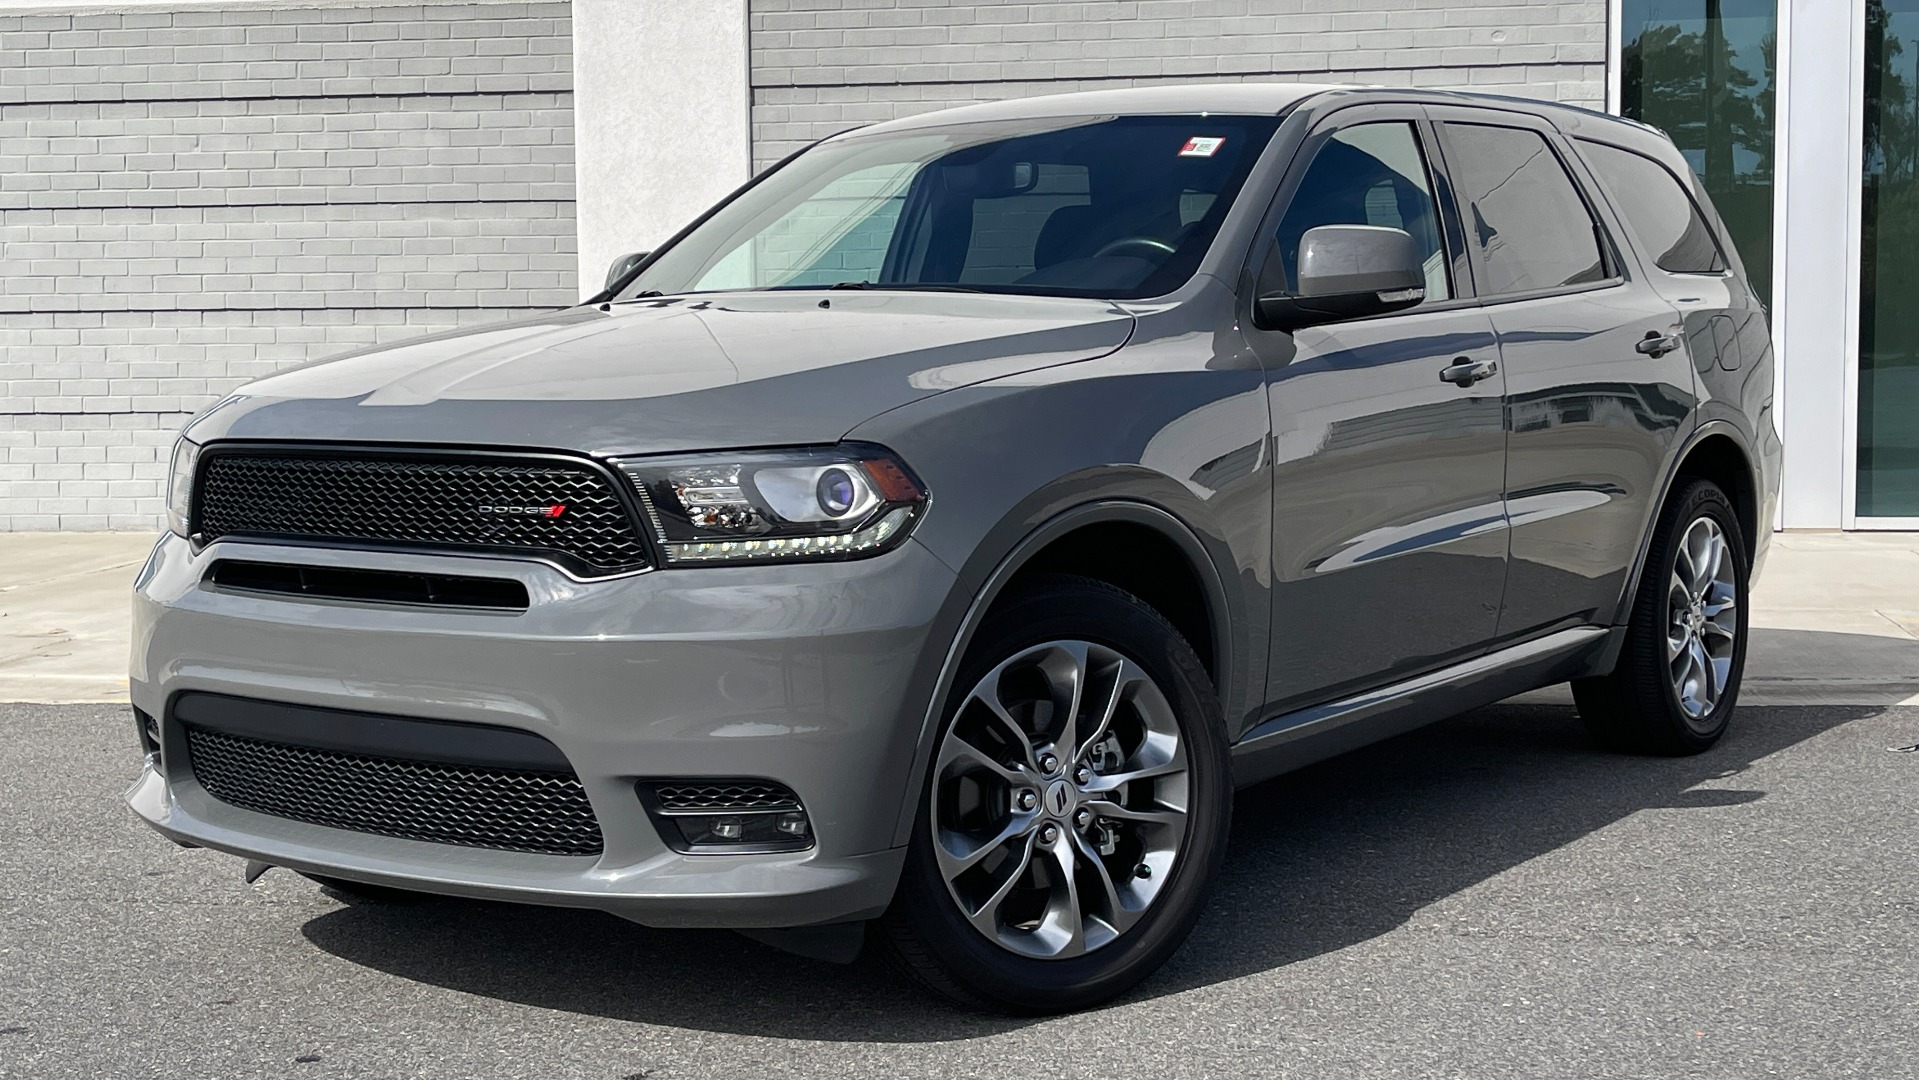 Used 2020 Dodge Durango GT PLUS AWD 3.6L / 8-SPD AUTO / ALPINE / 3-ROW / REARVIEW for sale $34,500 at Formula Imports in Charlotte NC 28227 1